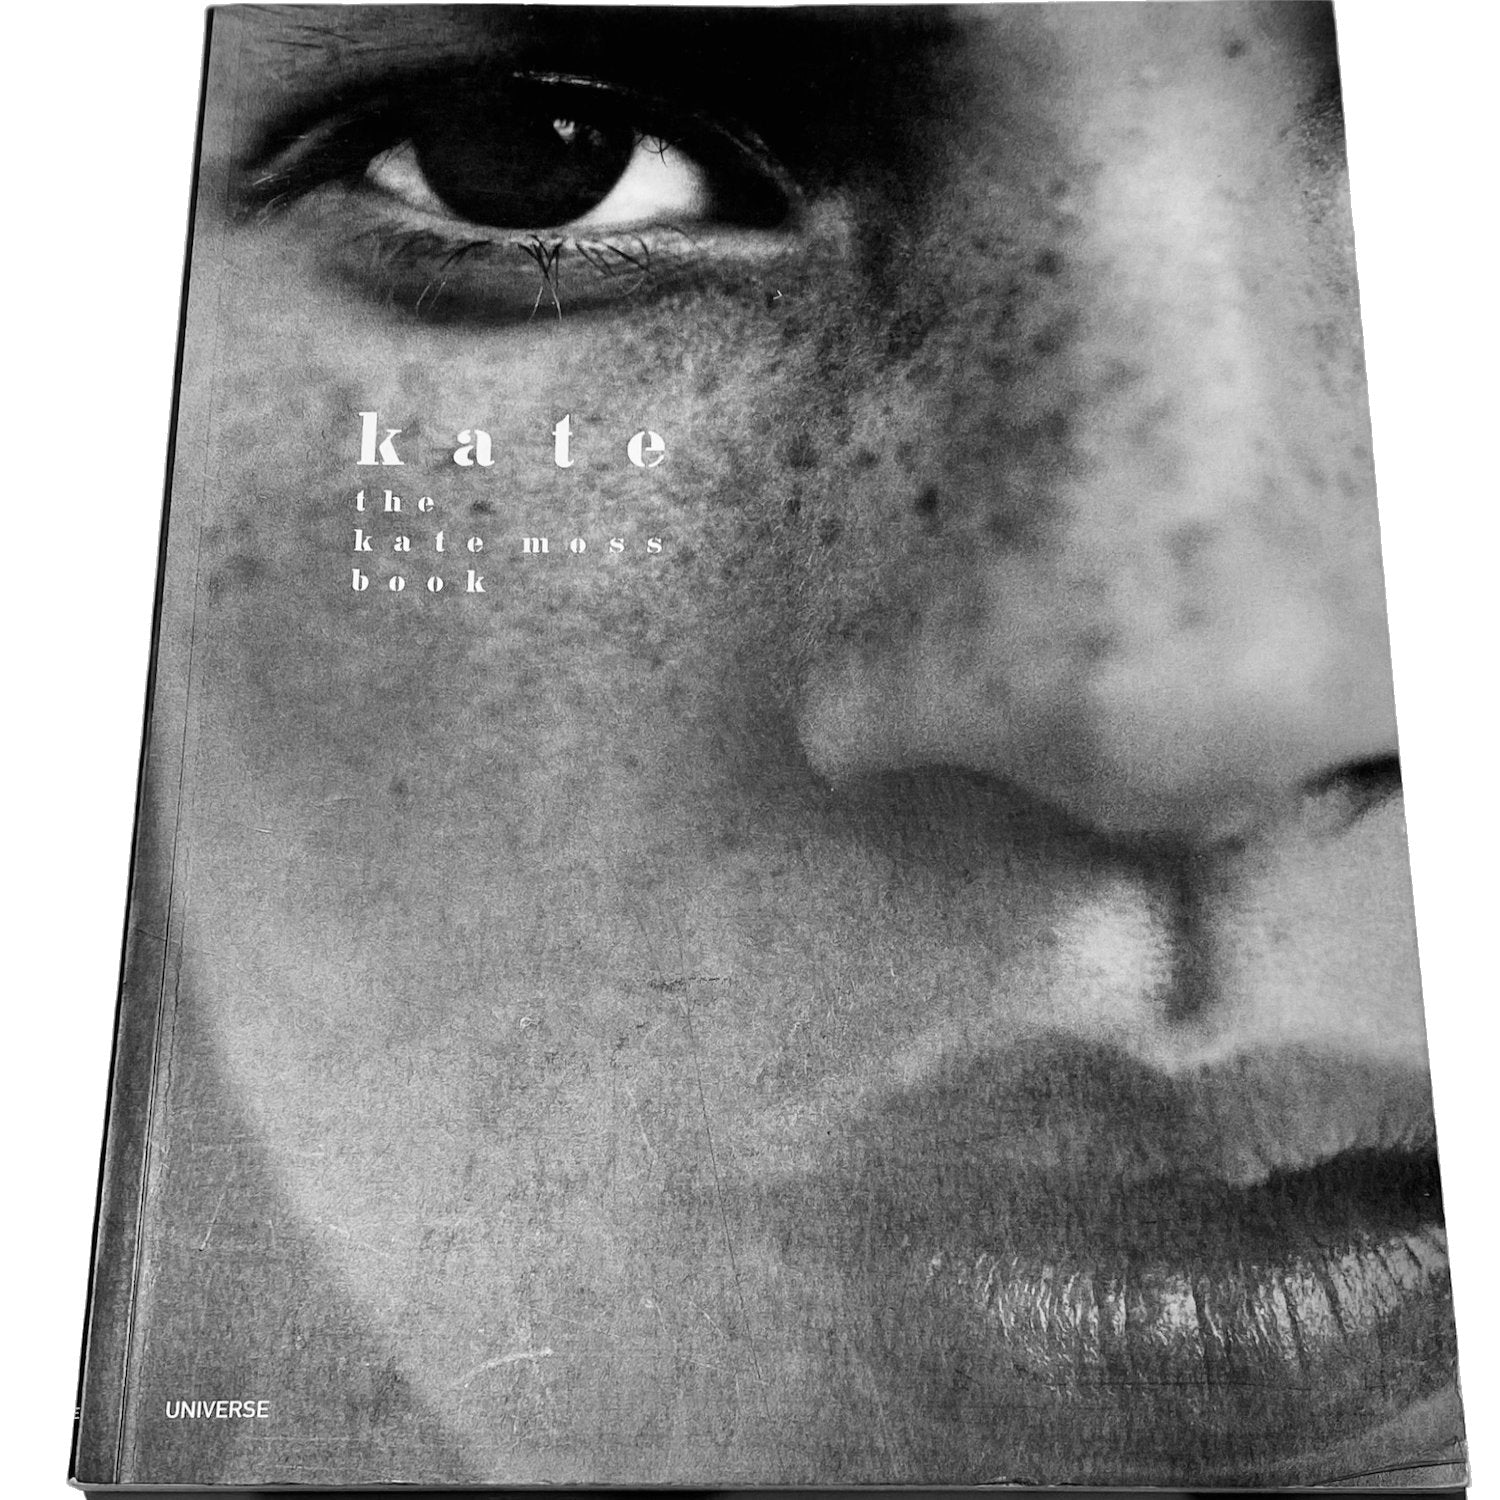 KATE_the kate moss book with a foreword by Liz Tilberis